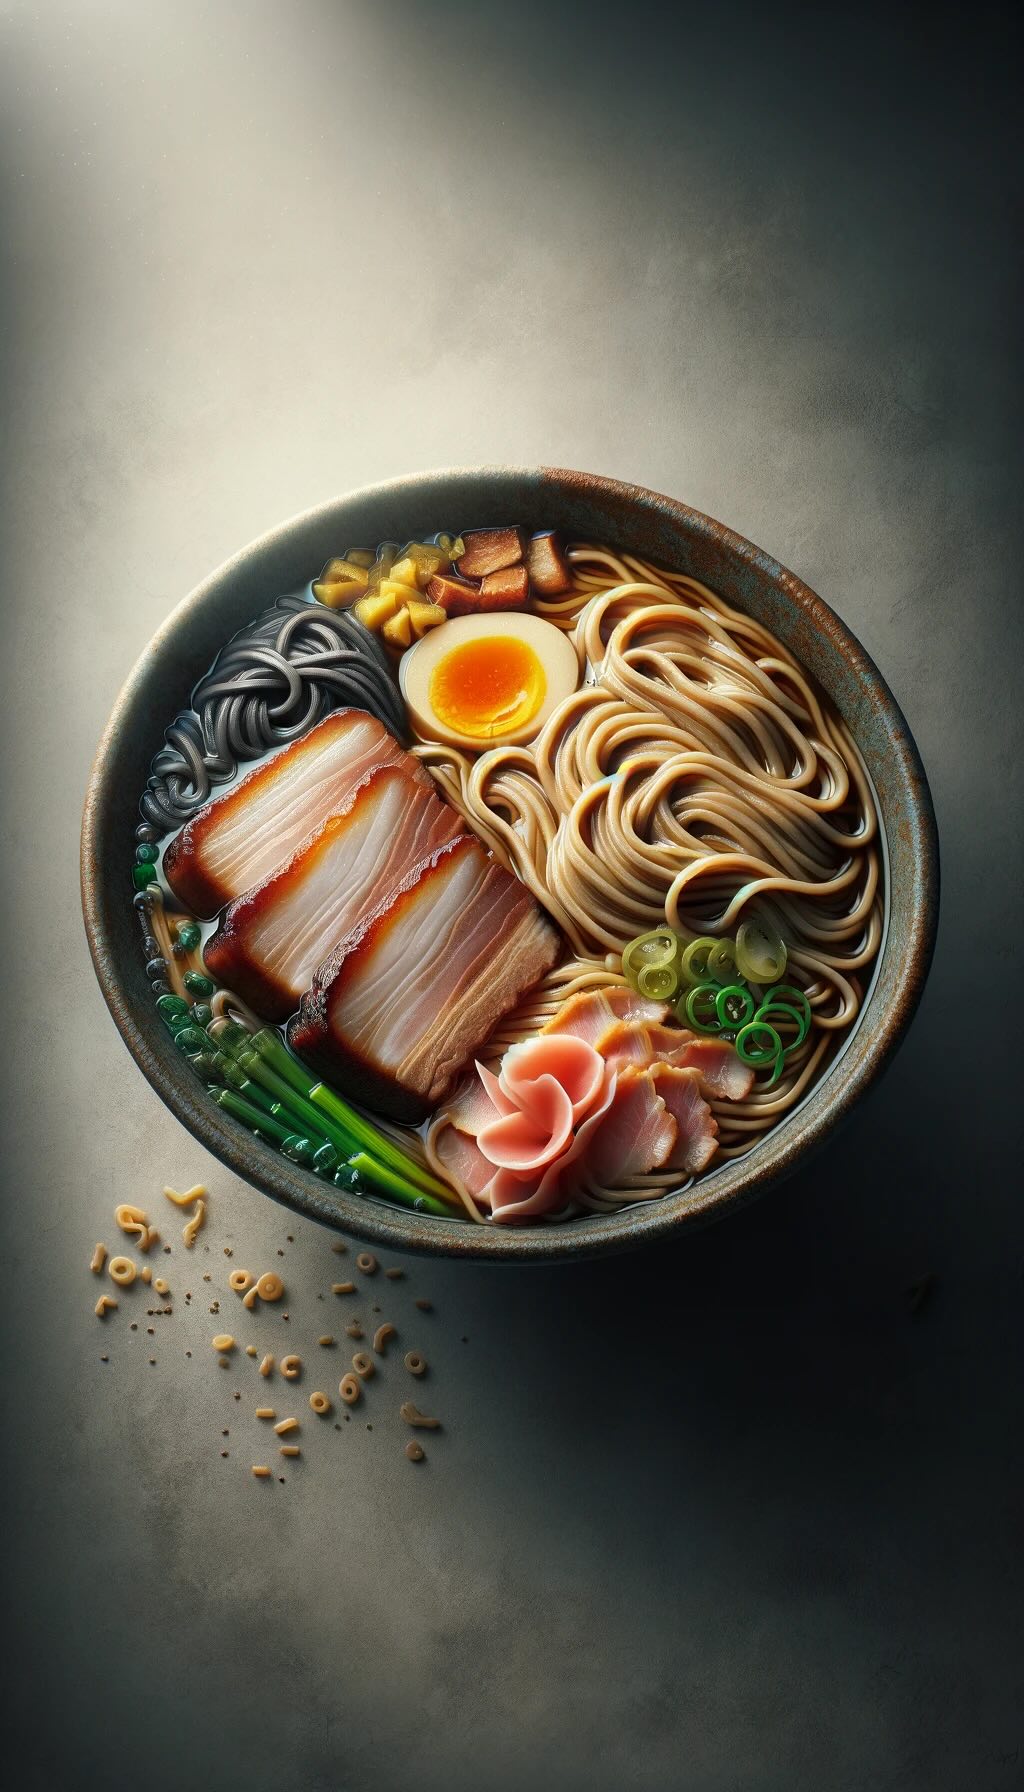 Okinawa Soba with its unique wheat noodles, the creamy pork bone and fish-based broth, and the traditional toppings like braised pork belly and pickled ginger